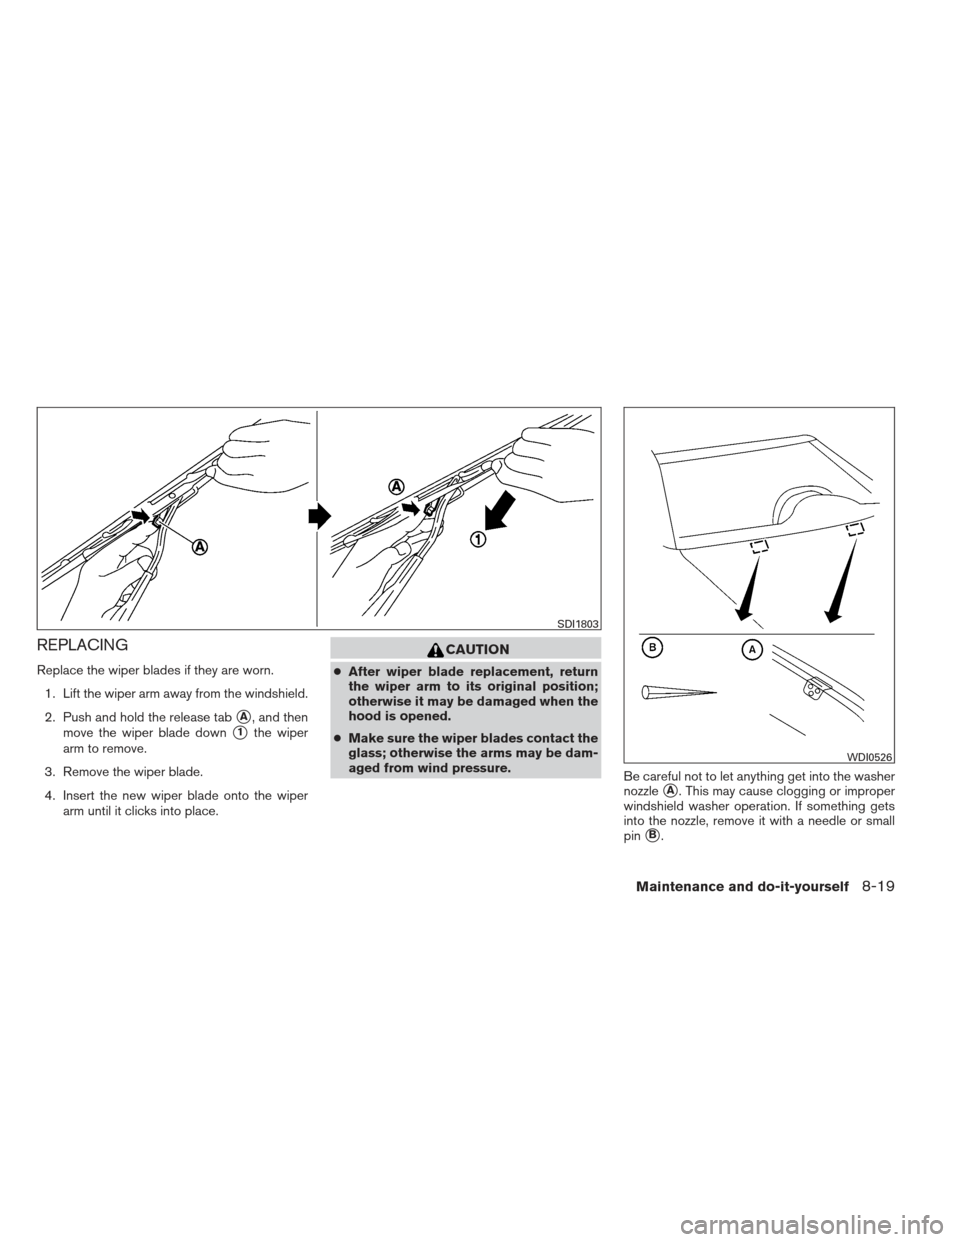 NISSAN VERSA SEDAN 2013 2.G Owners Manual REPLACING
Replace the wiper blades if they are worn.1. Lift the wiper arm away from the windshield.
2. Push and hold the release tab
A, and then
move the wiper blade down
1the wiper
arm to remove.
3